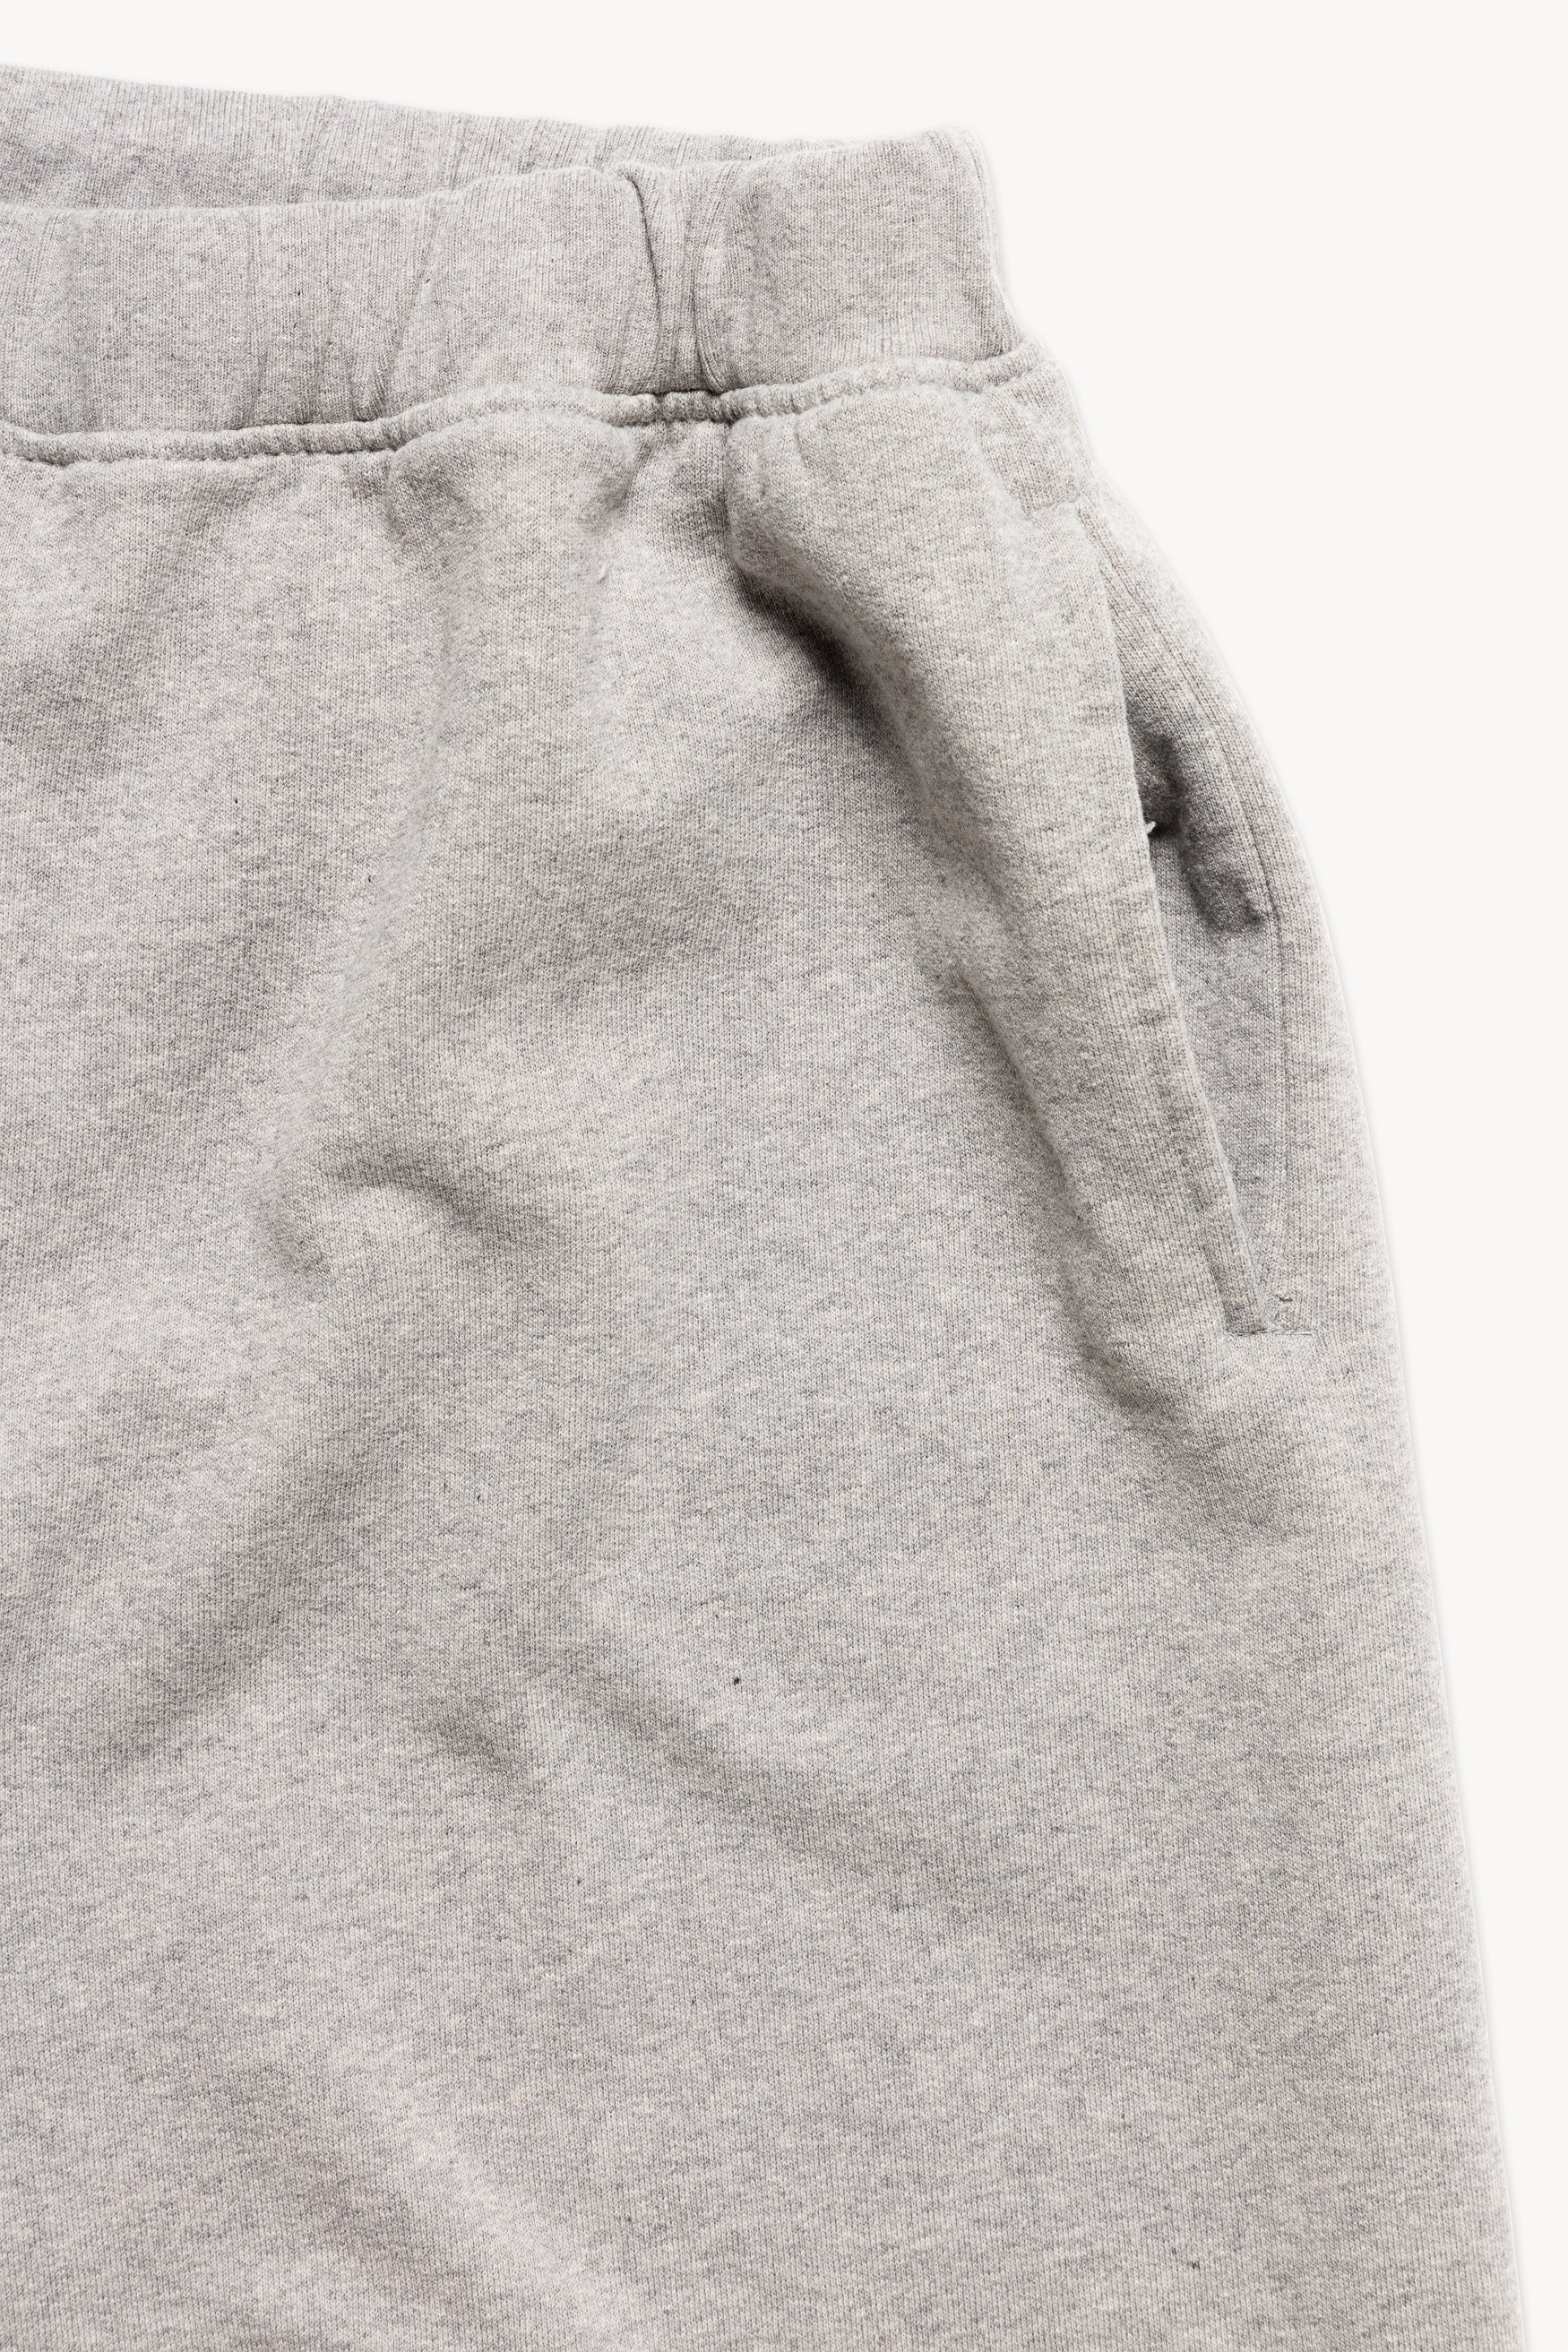 Load image into Gallery viewer, Aries x New Balance Sweatpants